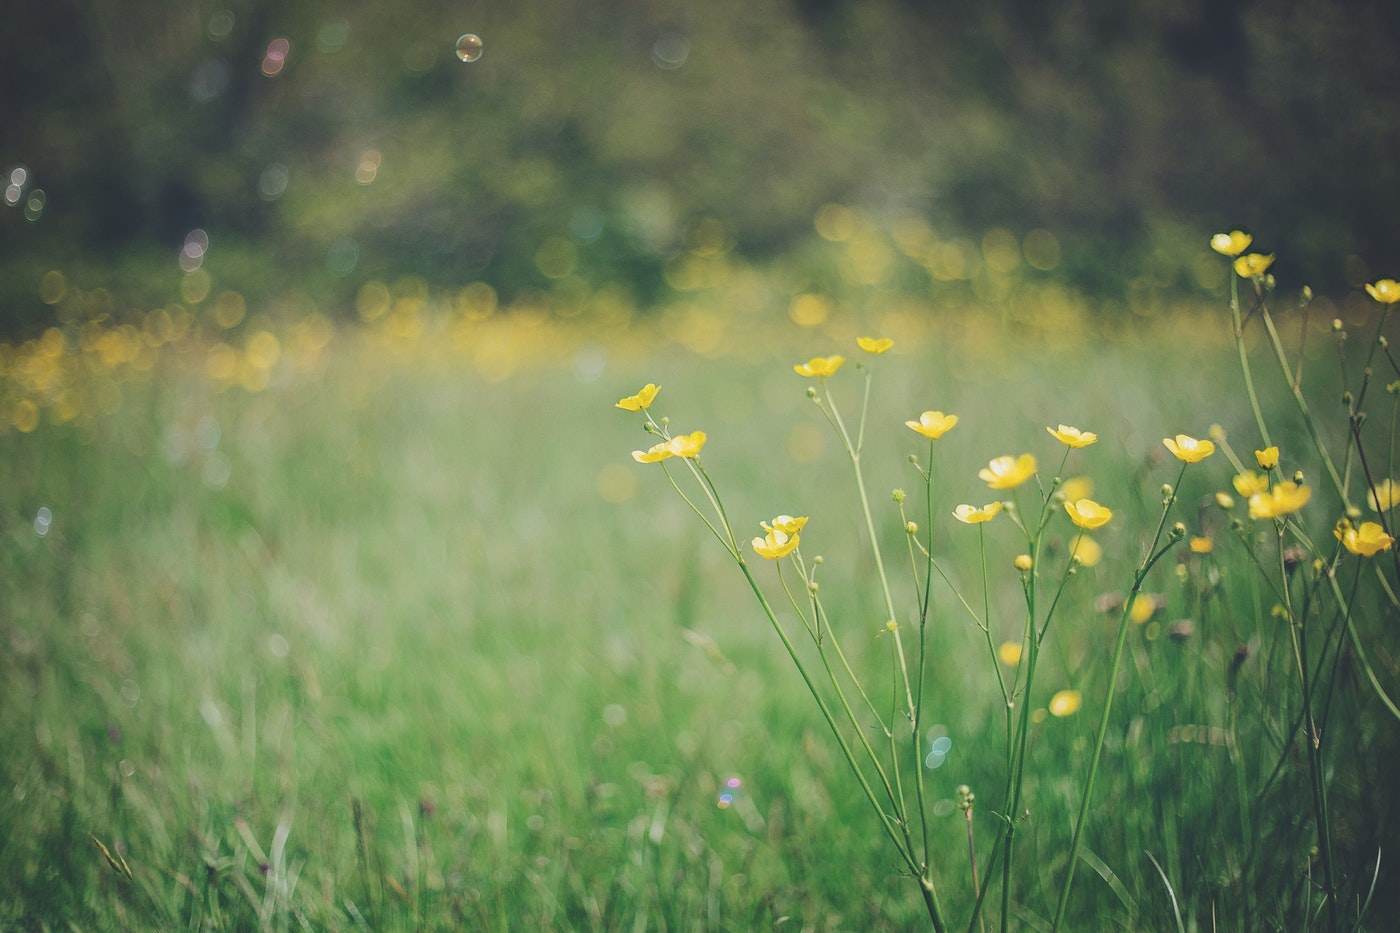 buttercups in lawn - easing hoa restrictions to create eco-friendly gardens